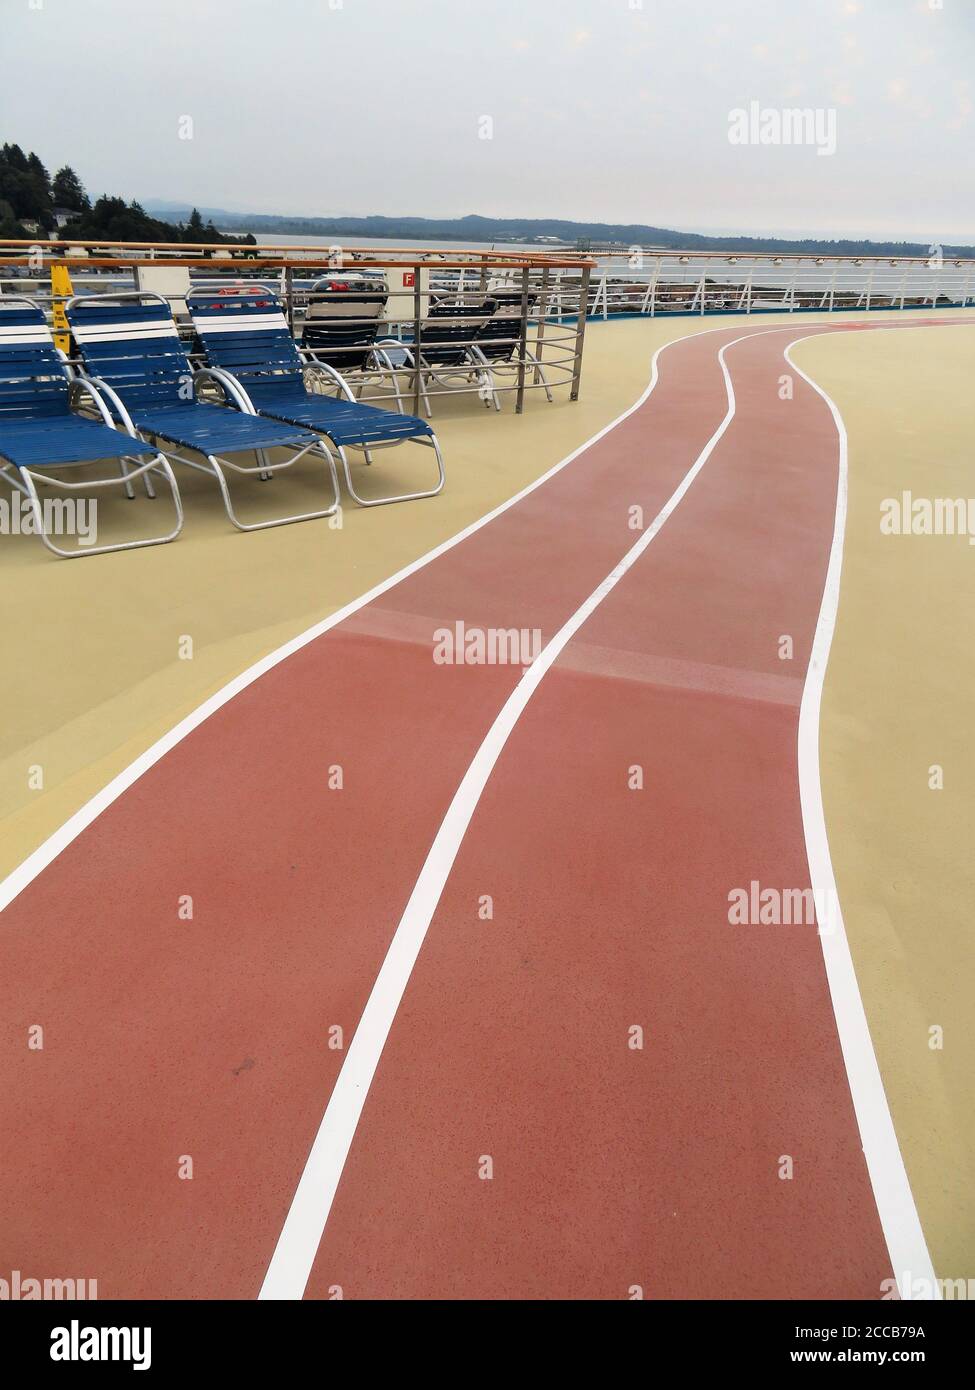 Jogging track on a cruise ship deck Stock Photo